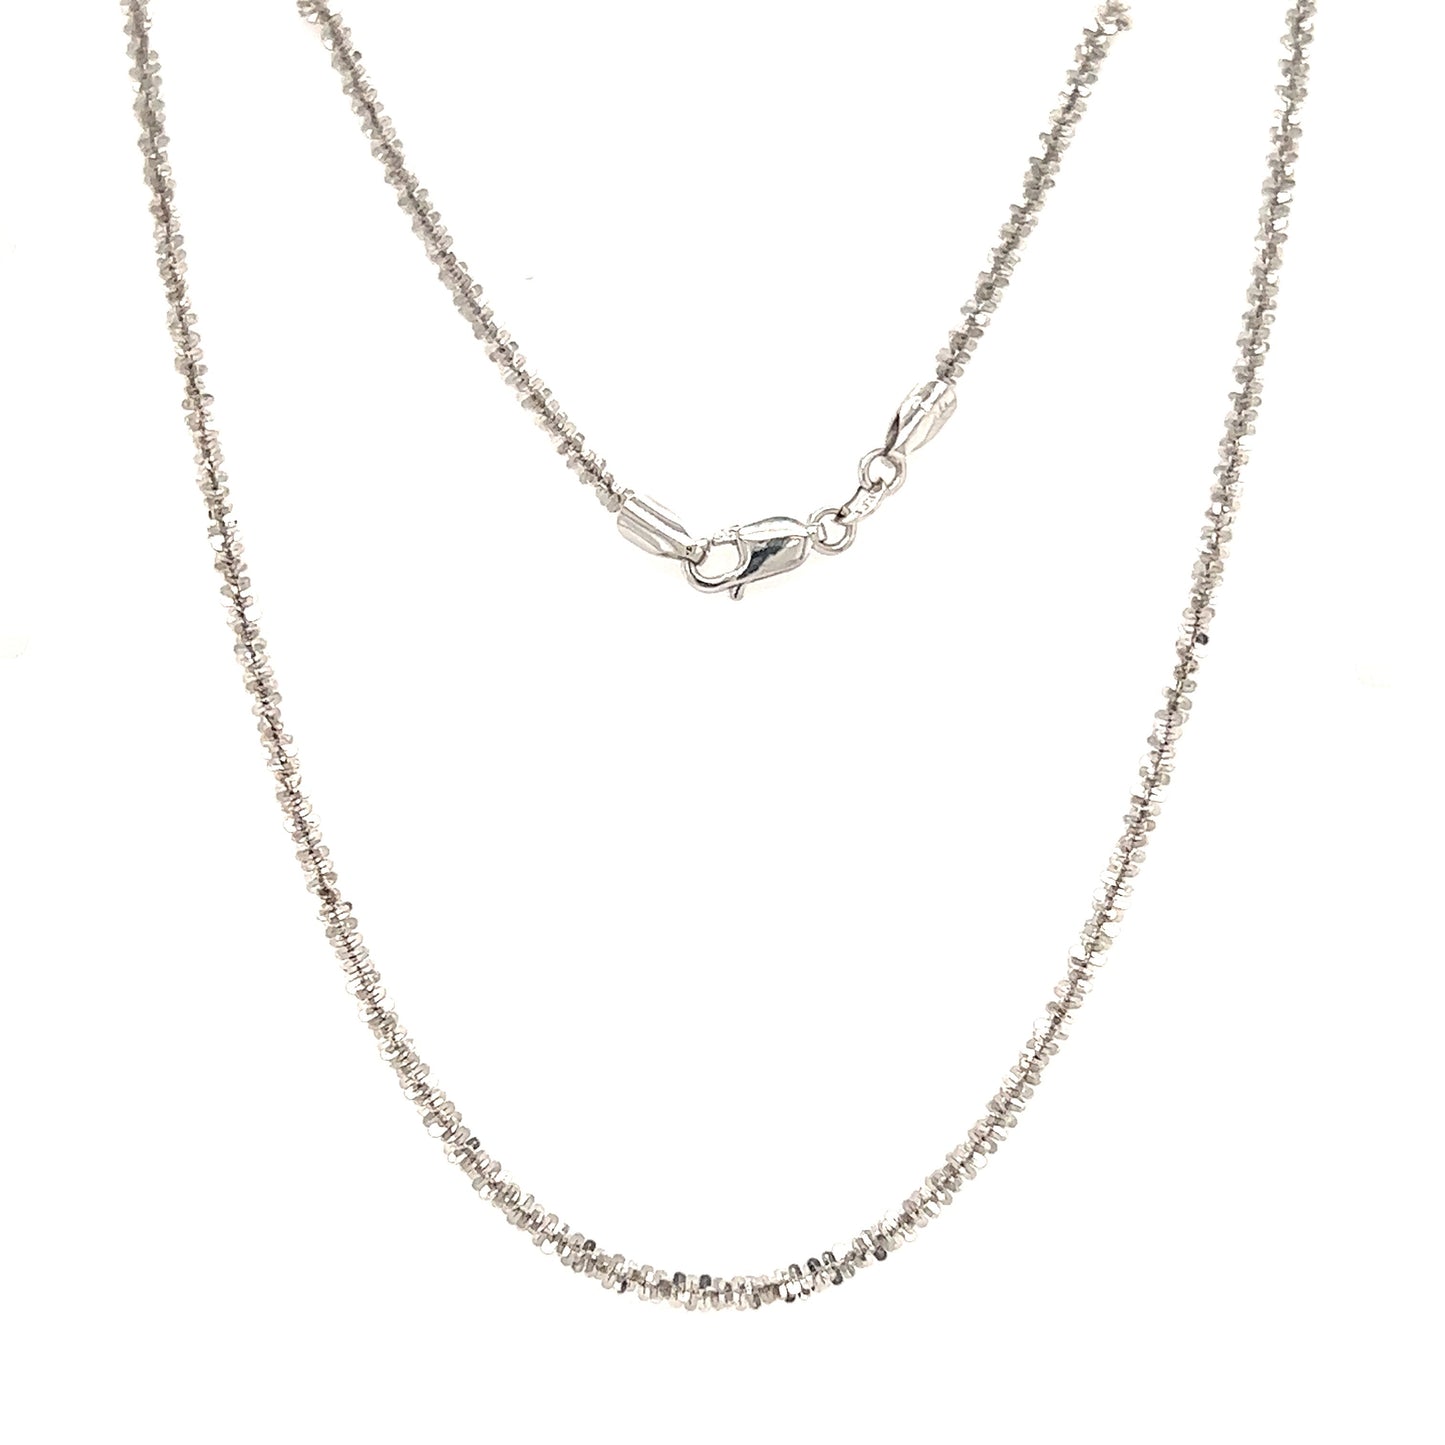 Sparkle Chain 2.0mm with 18in Length in 14K White Gold Full Chain View